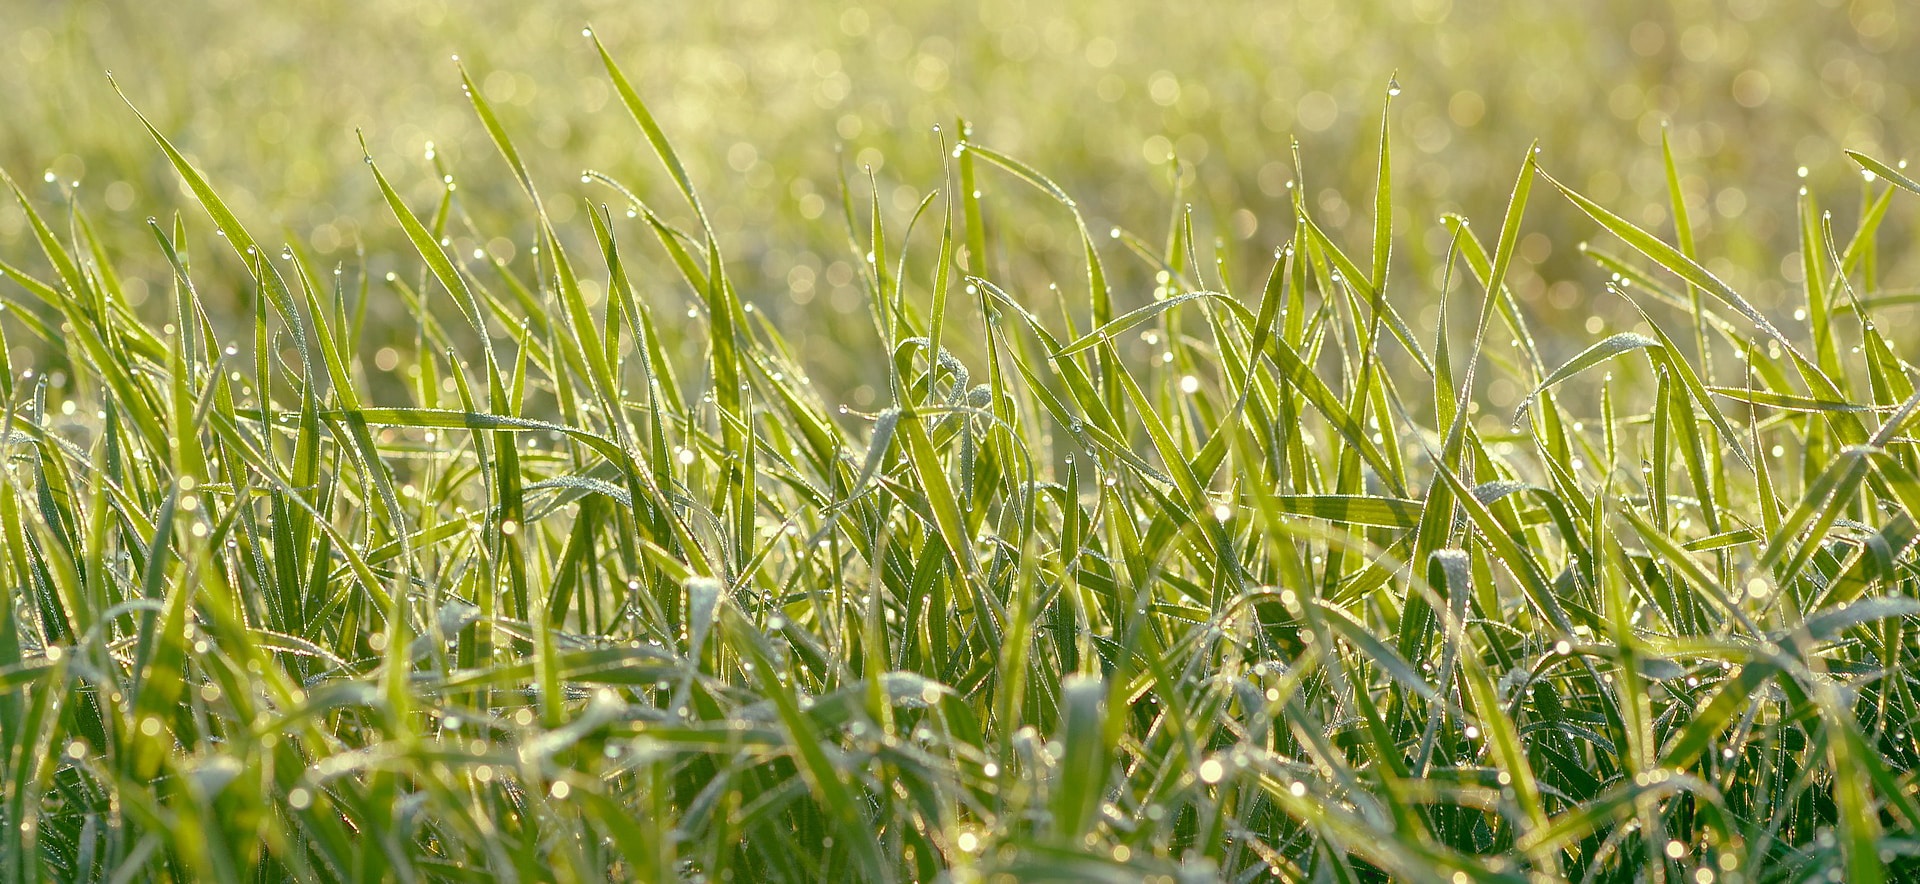 up-close image of dew on freshly-cut grass by Scott's Lawn Care